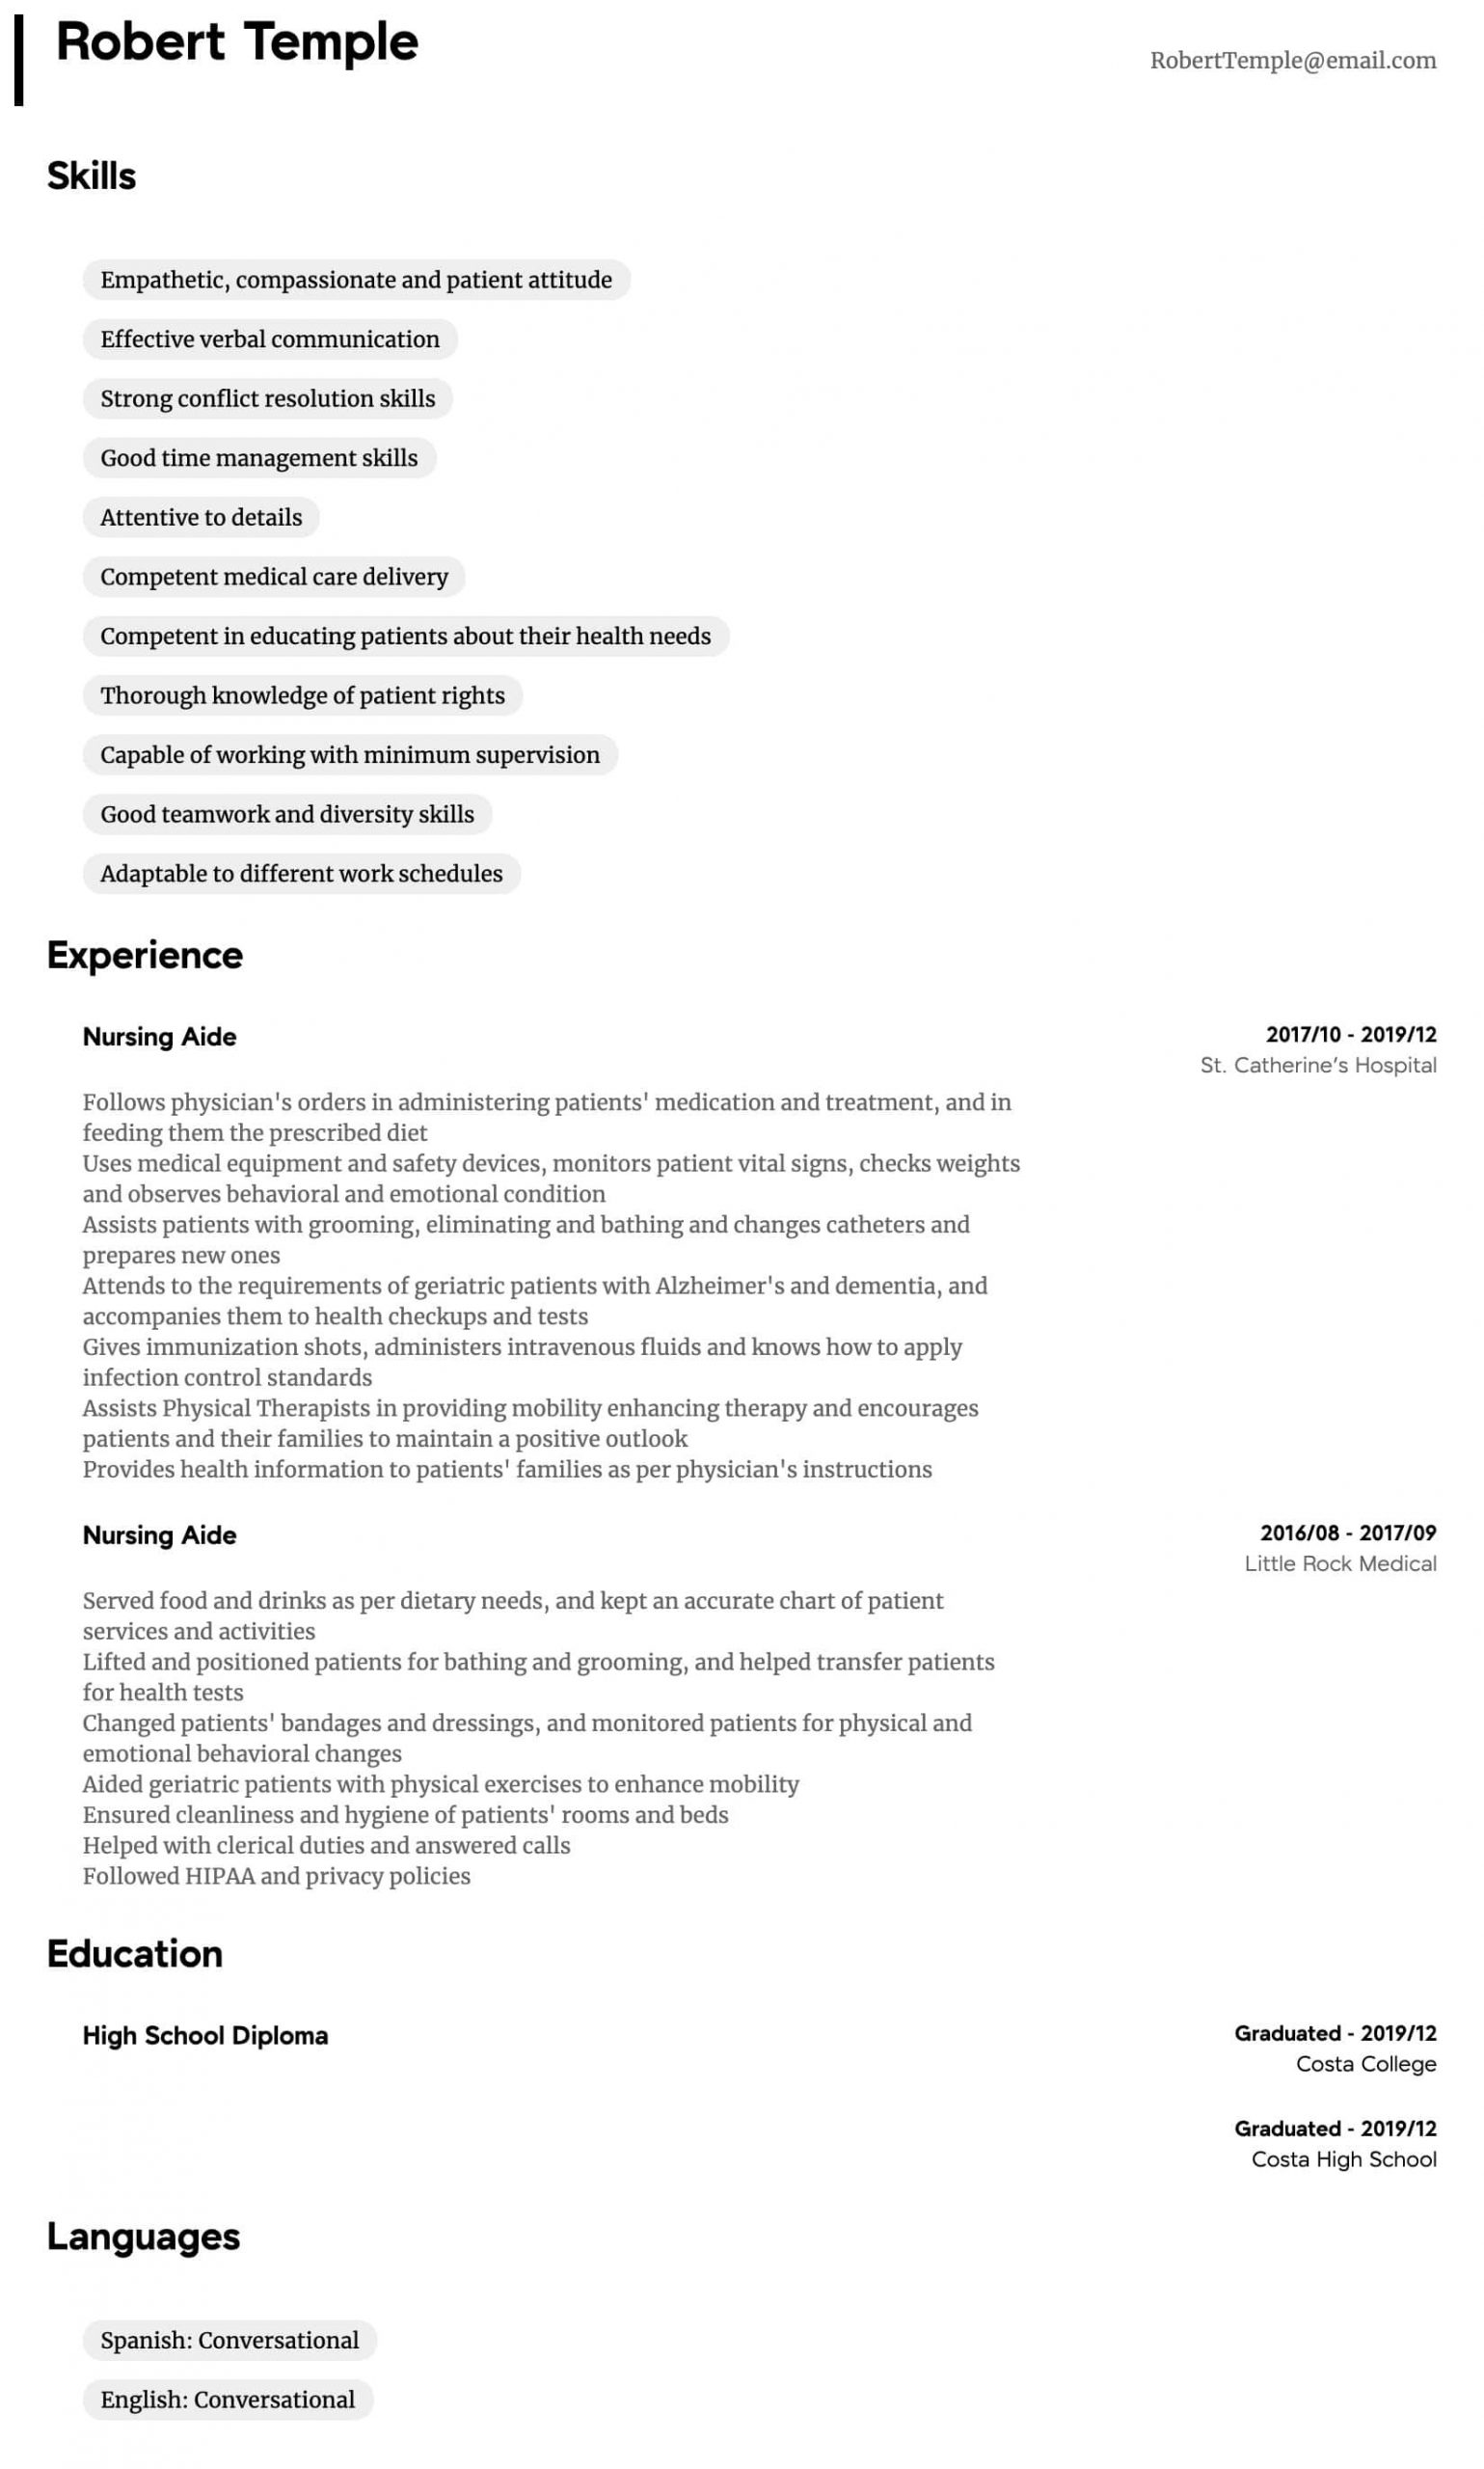 Sample Resume for Health Care Aide Job Nursing Aide Resume Samples All Experience Levels Resume.com …